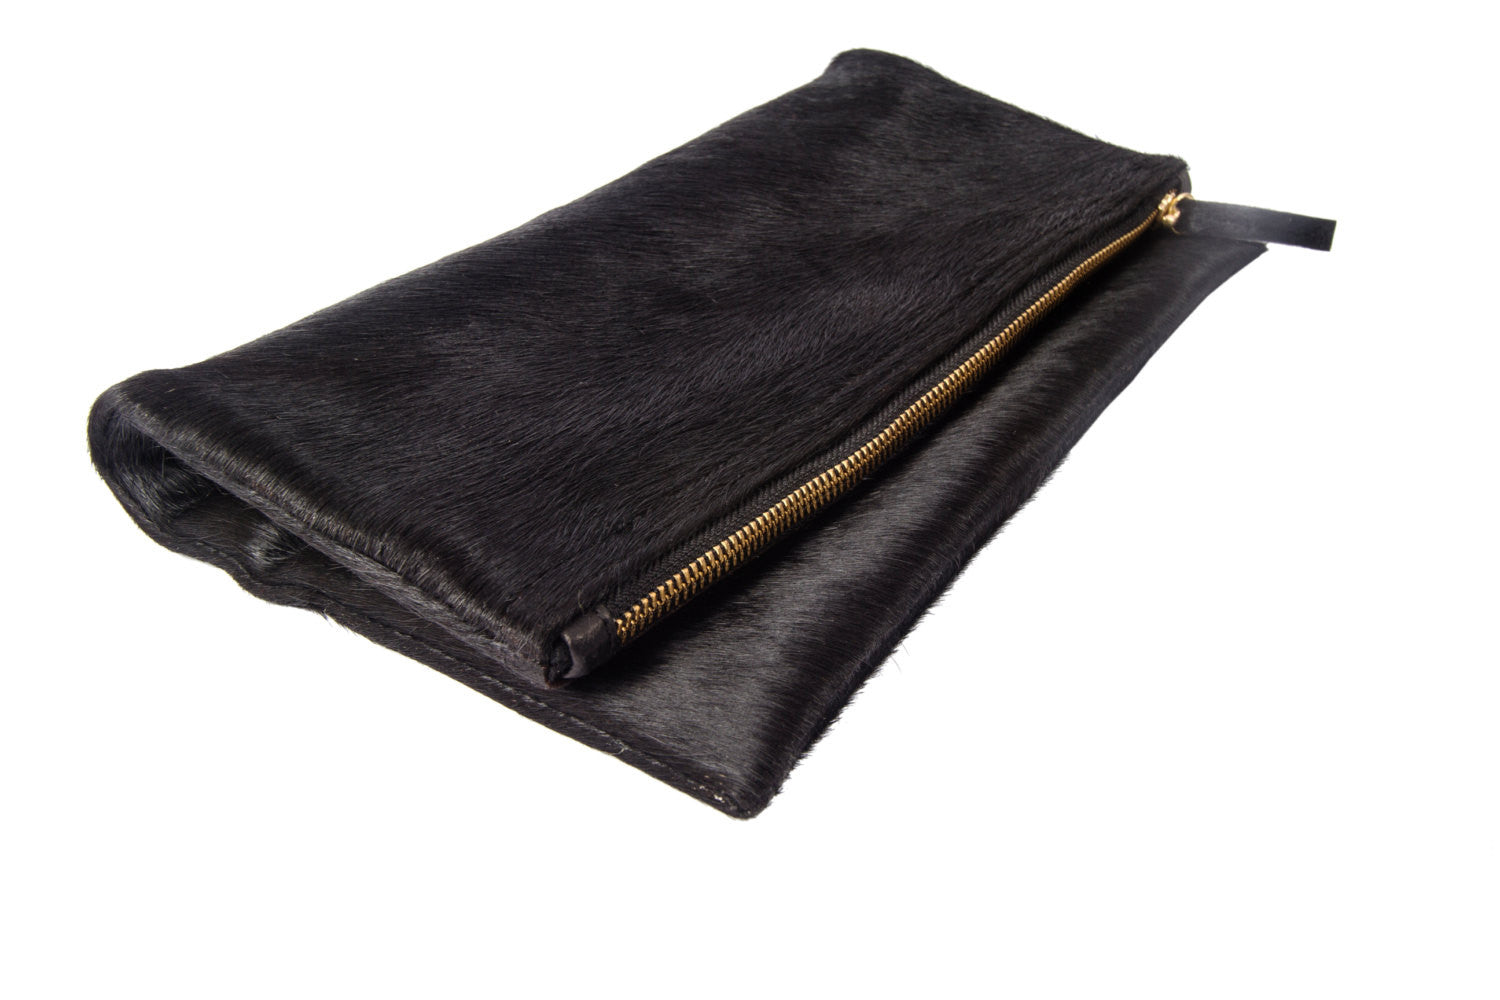 Flat View Calf Hair Leather Foldover Clutch